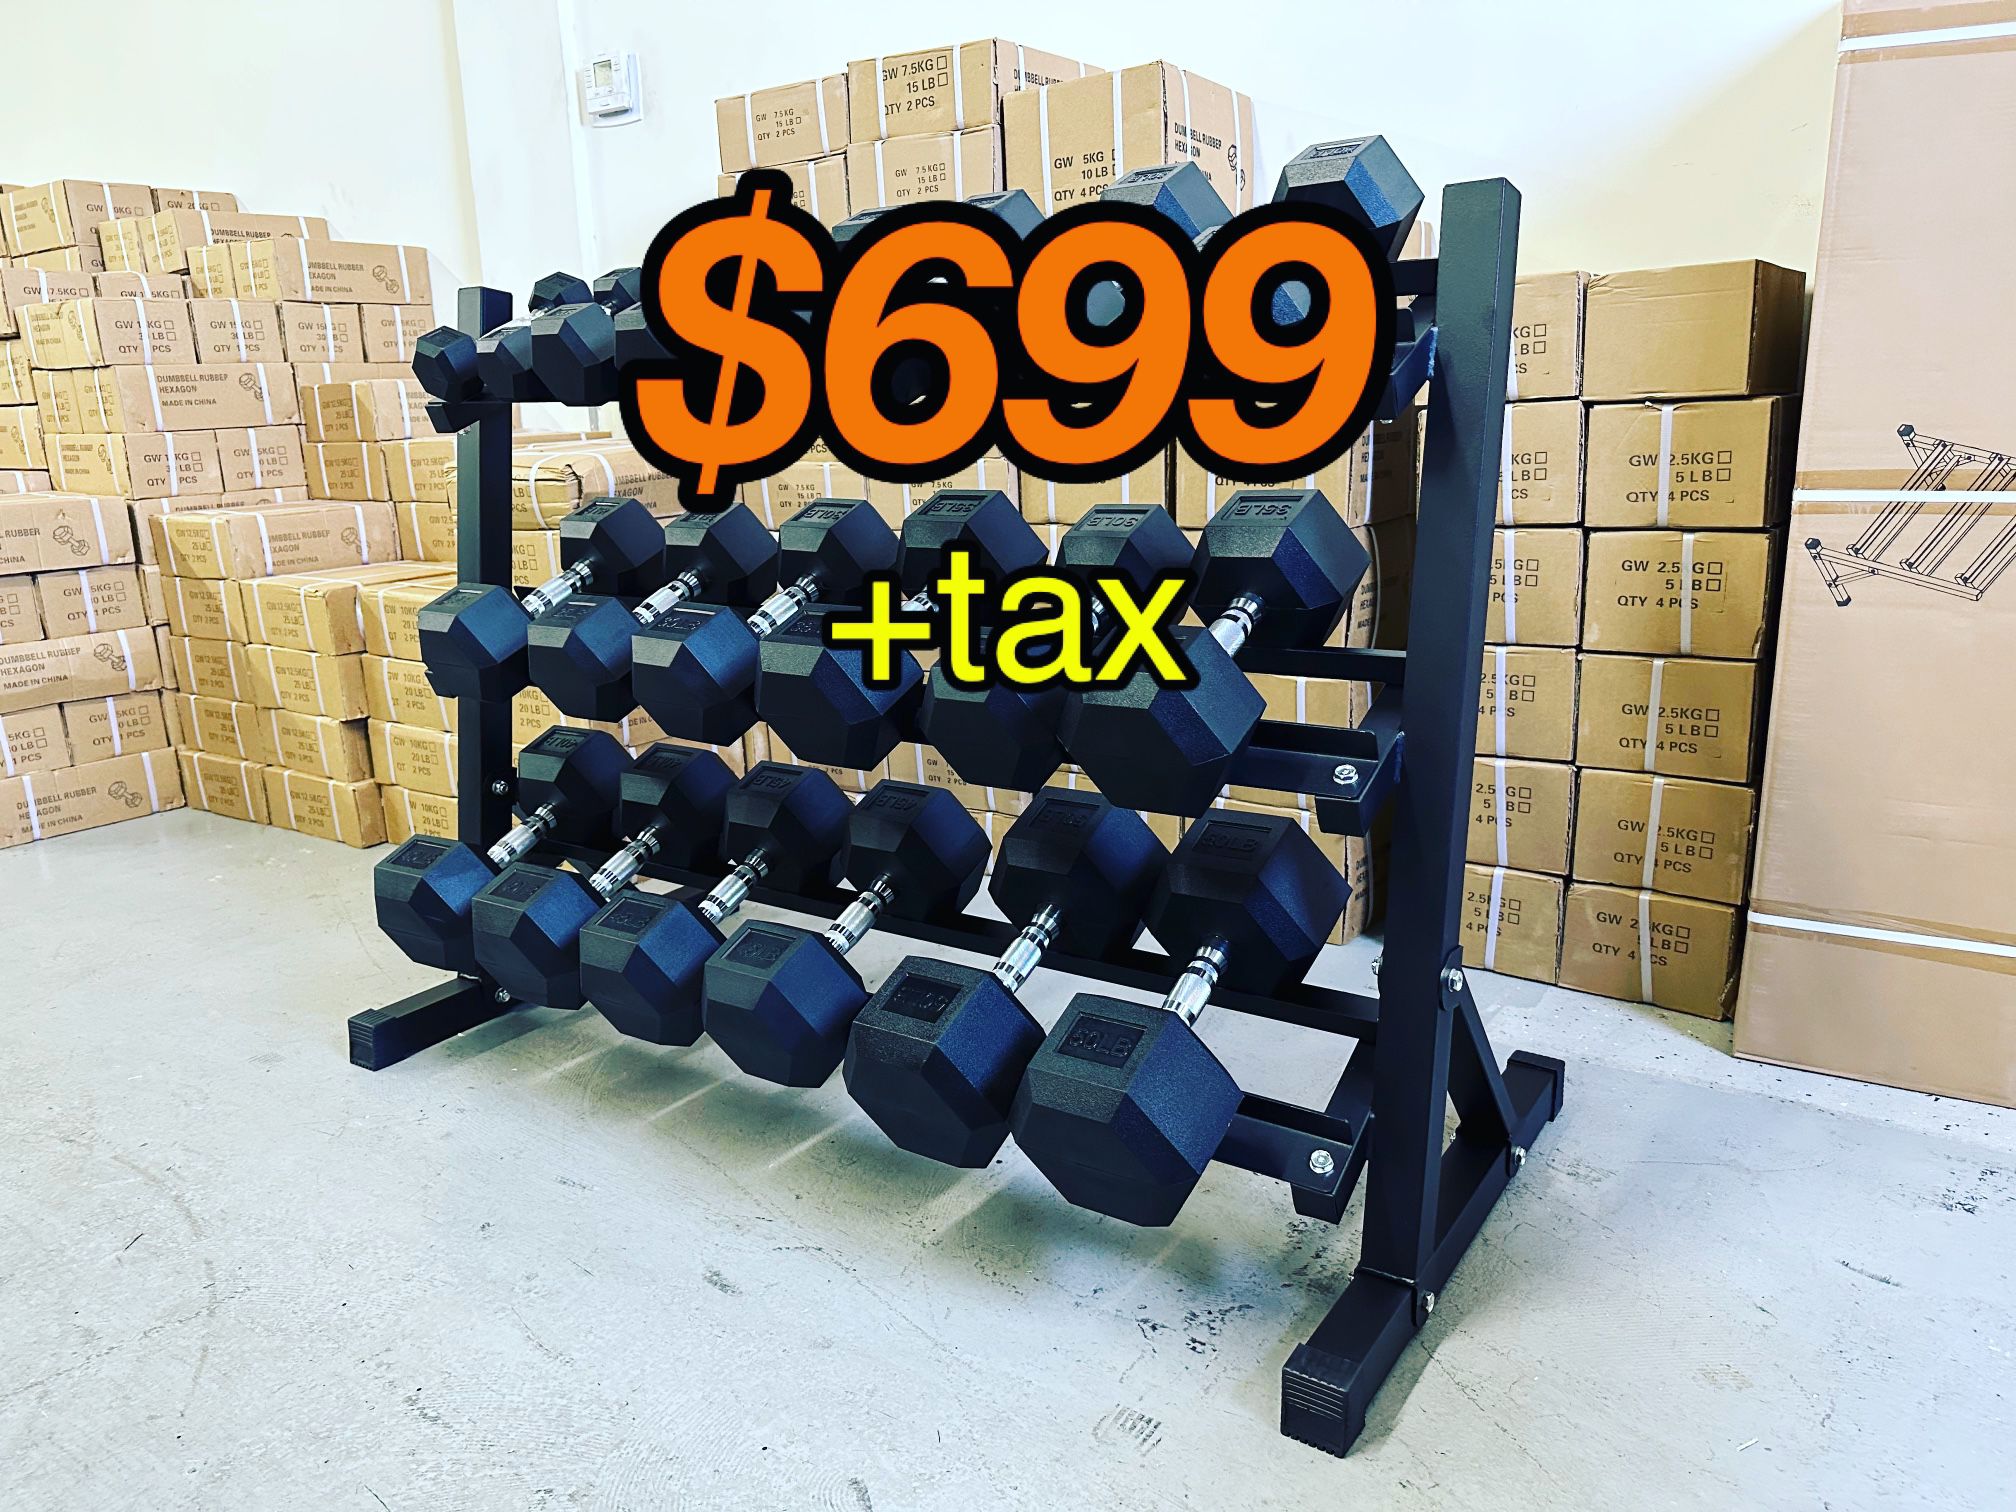 Dumbbell Set 5lb - 50lb With Heavy Duty 3 Tier Rack Brand New🏋🏽‍♂️  In The Box📦  